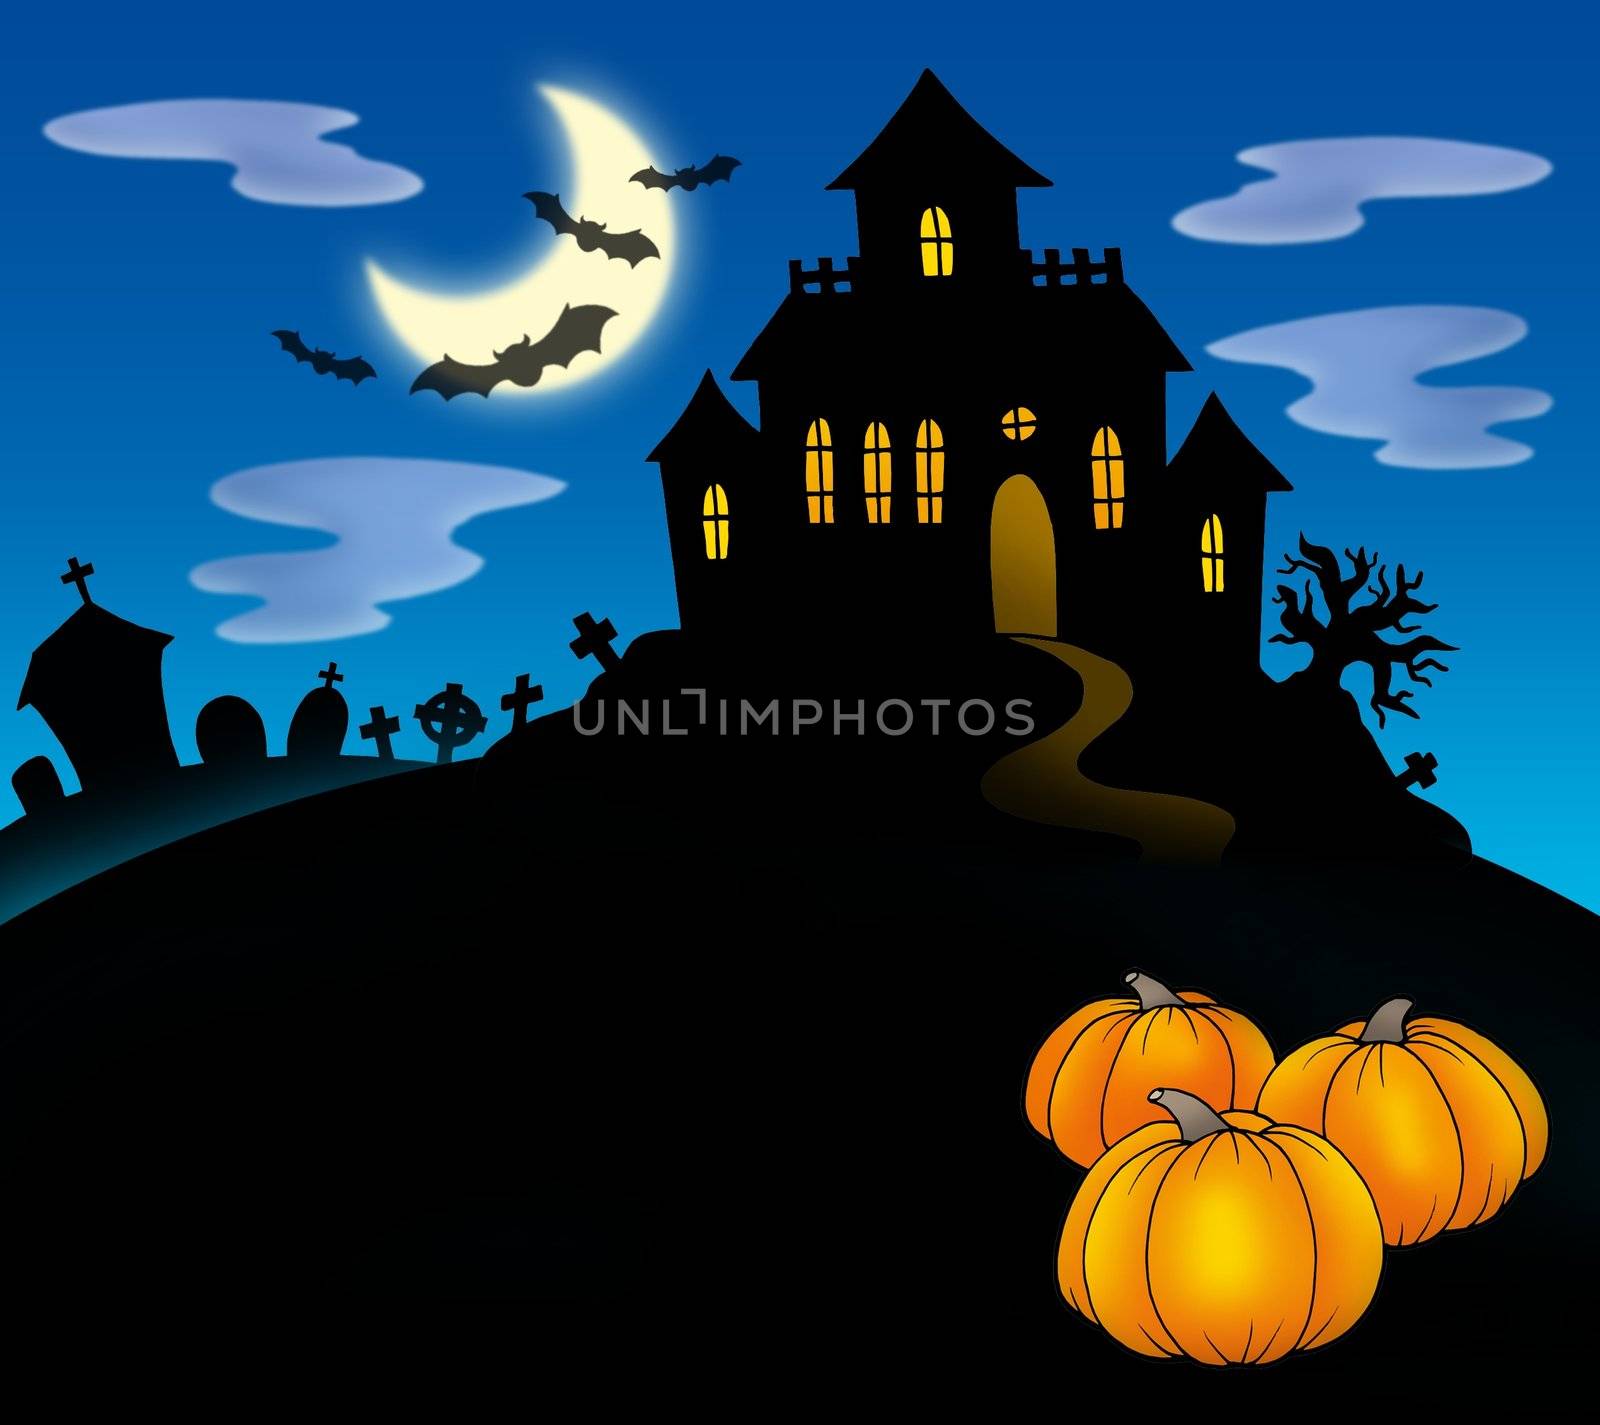 Haunted house with pumpkins - color illustration.